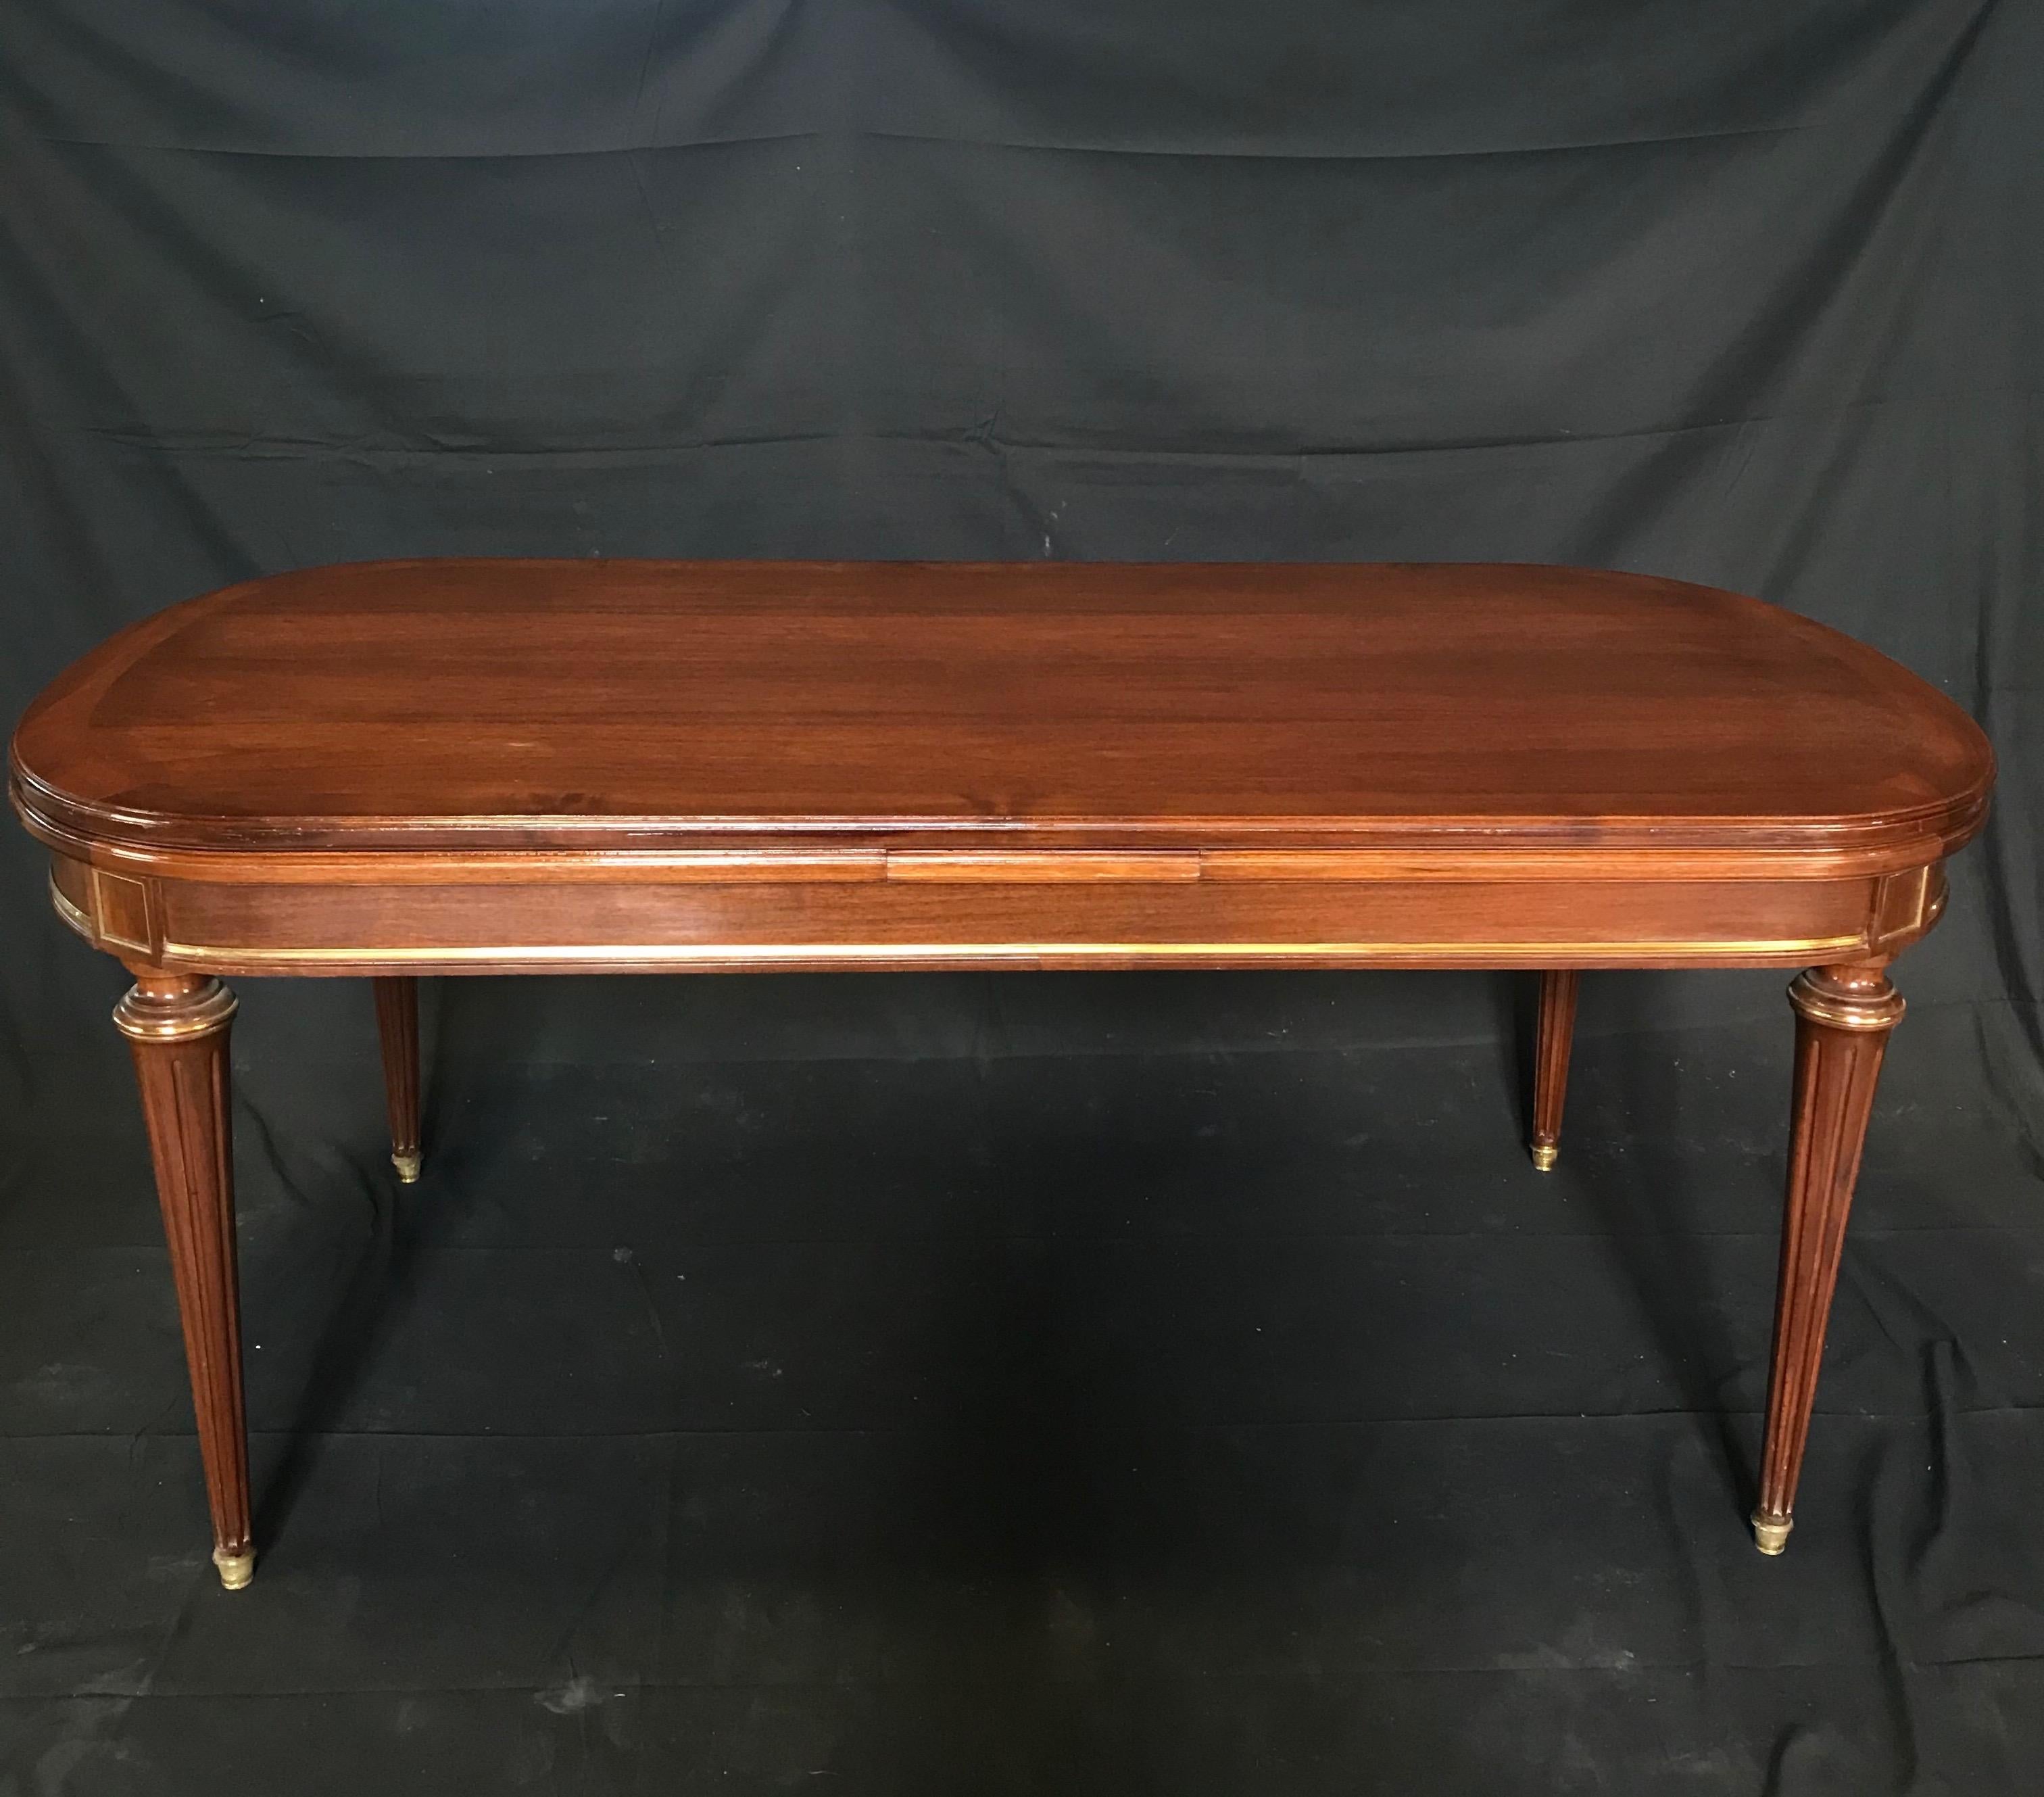 Versatile Louis XVI style oval inlaid banded fruitwood dining table with lacquered finish, bronze banding and two leaves to make it a roomy total length of 9.5 feet. The table has fine details such as gold corner squares, turned fluted legs with